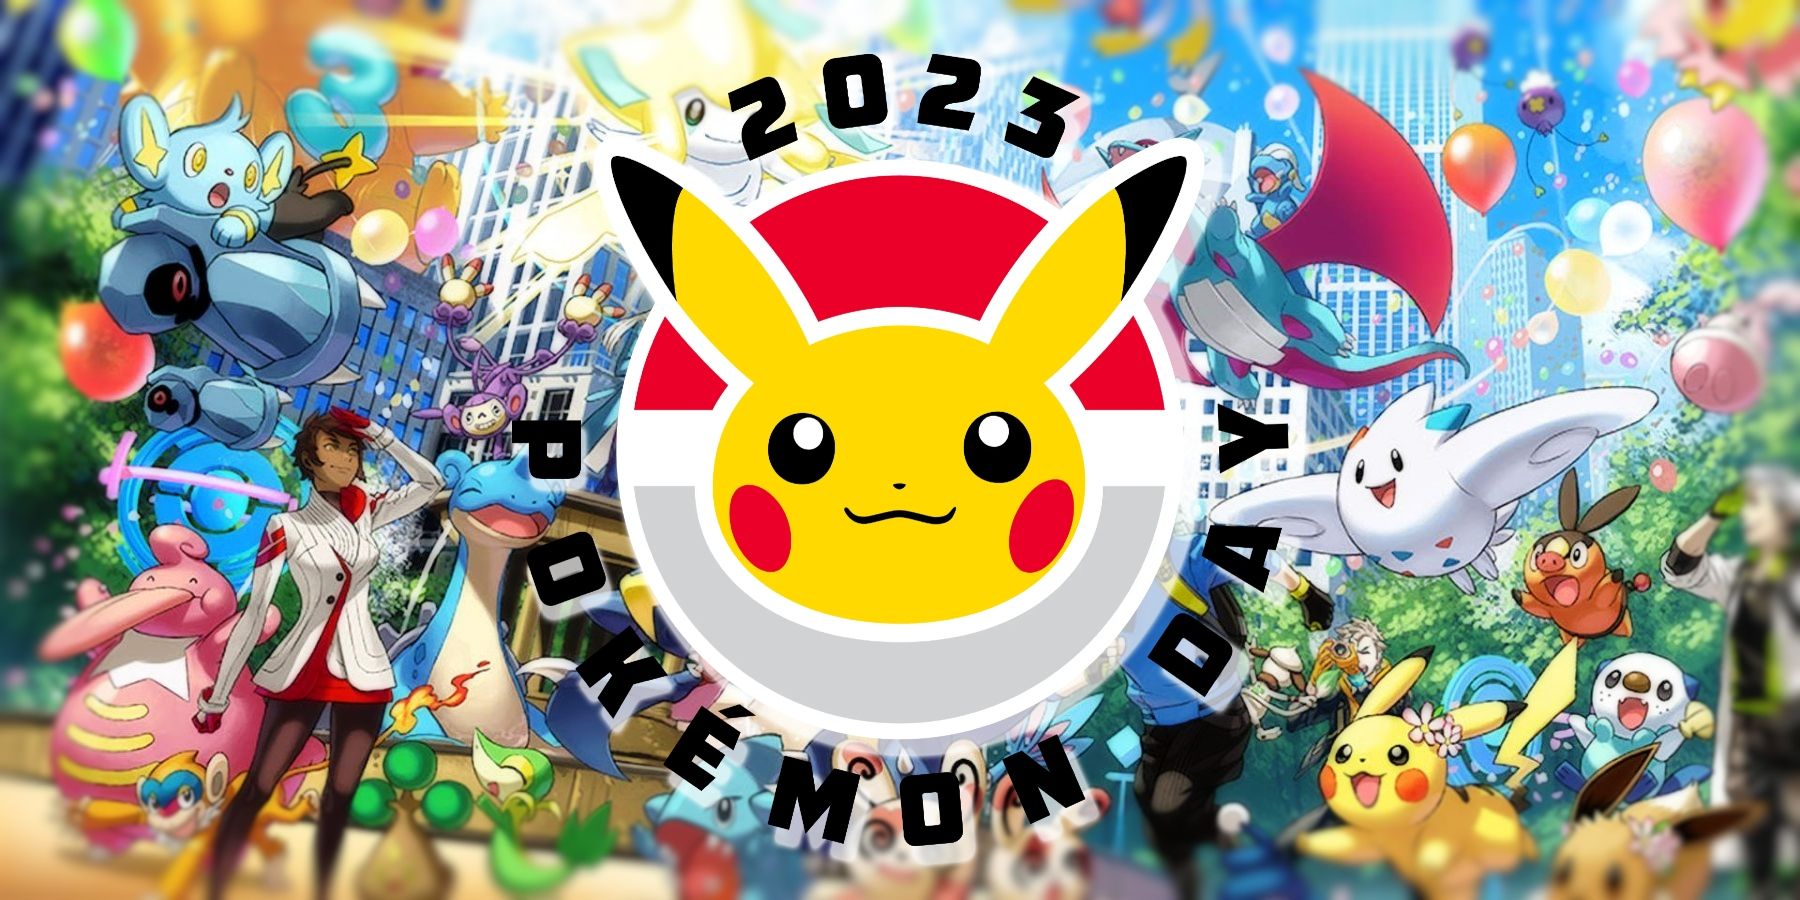 What Will Be Announced On Pokémon Day 2023?